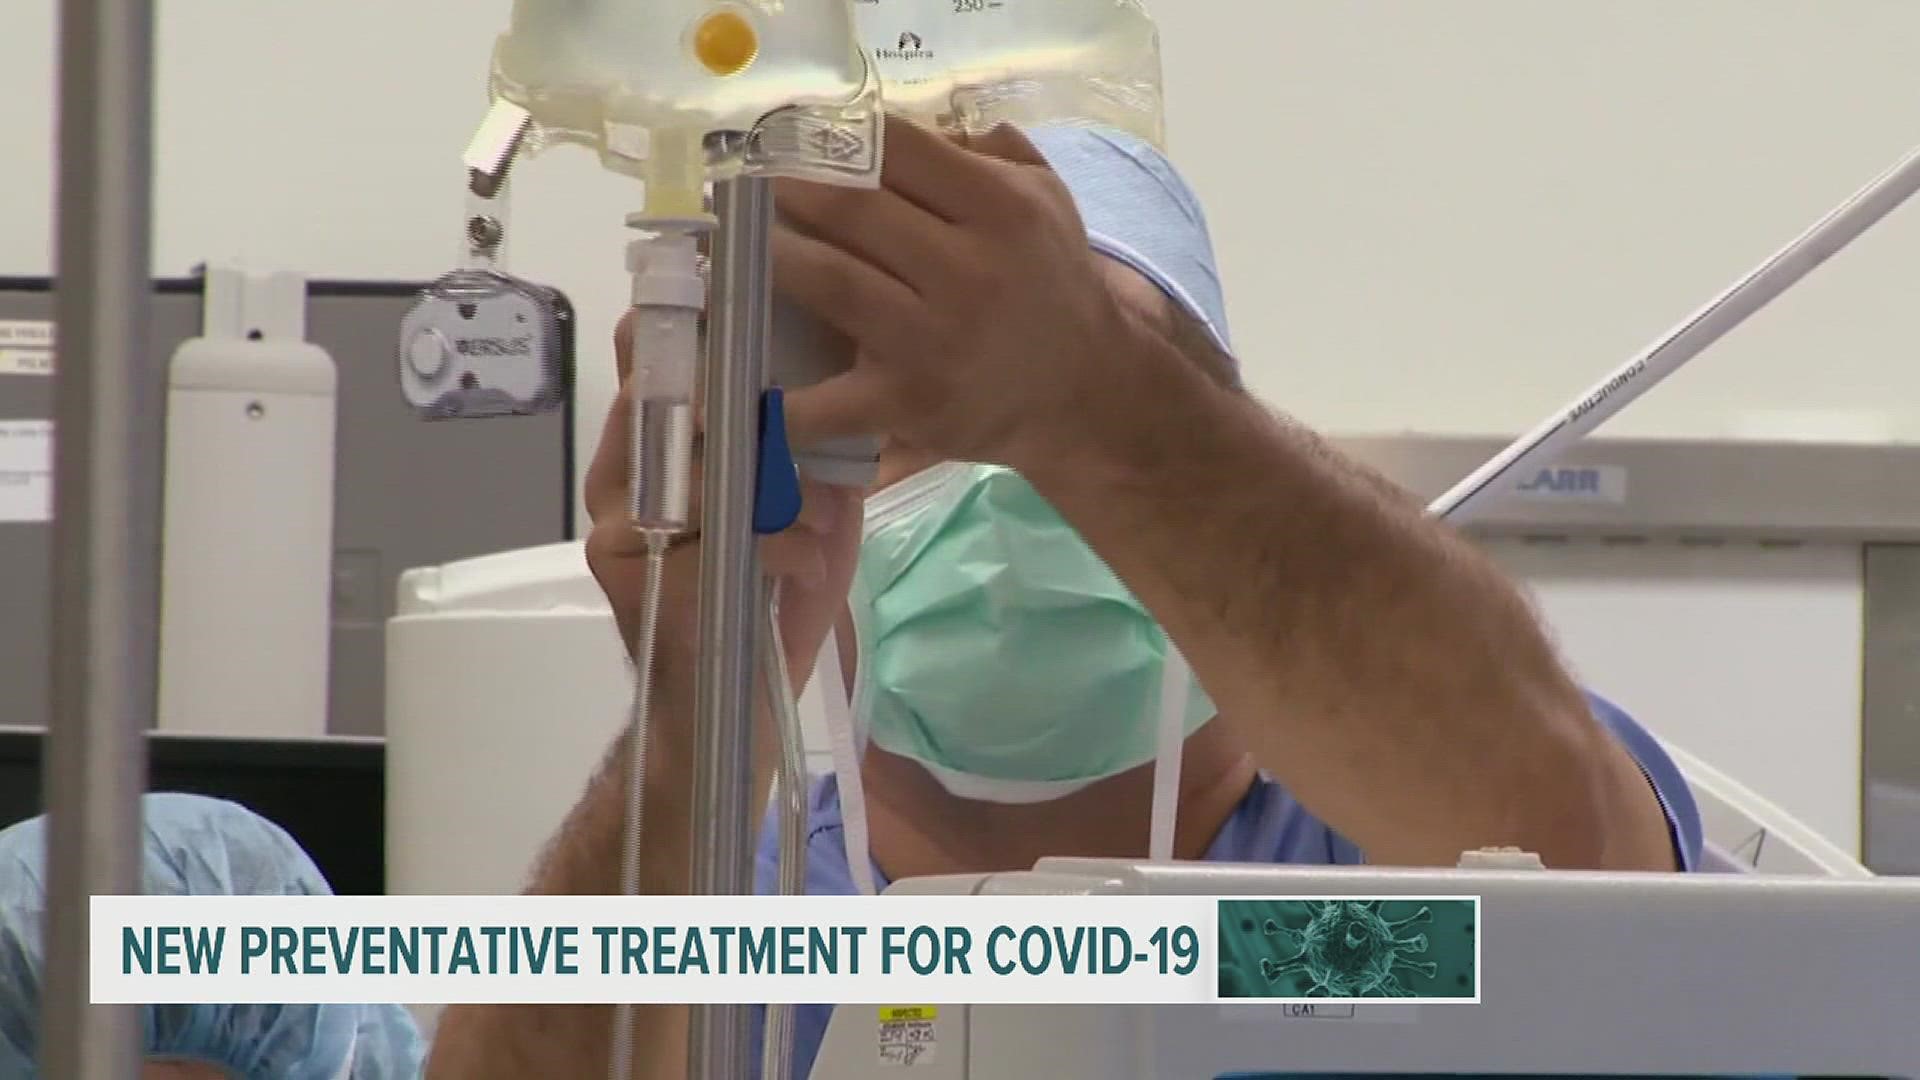 The hospital system is expanding access to a monoclonal antibody outpatient treatment that can be given to patients who have been exposed to COVID-19.